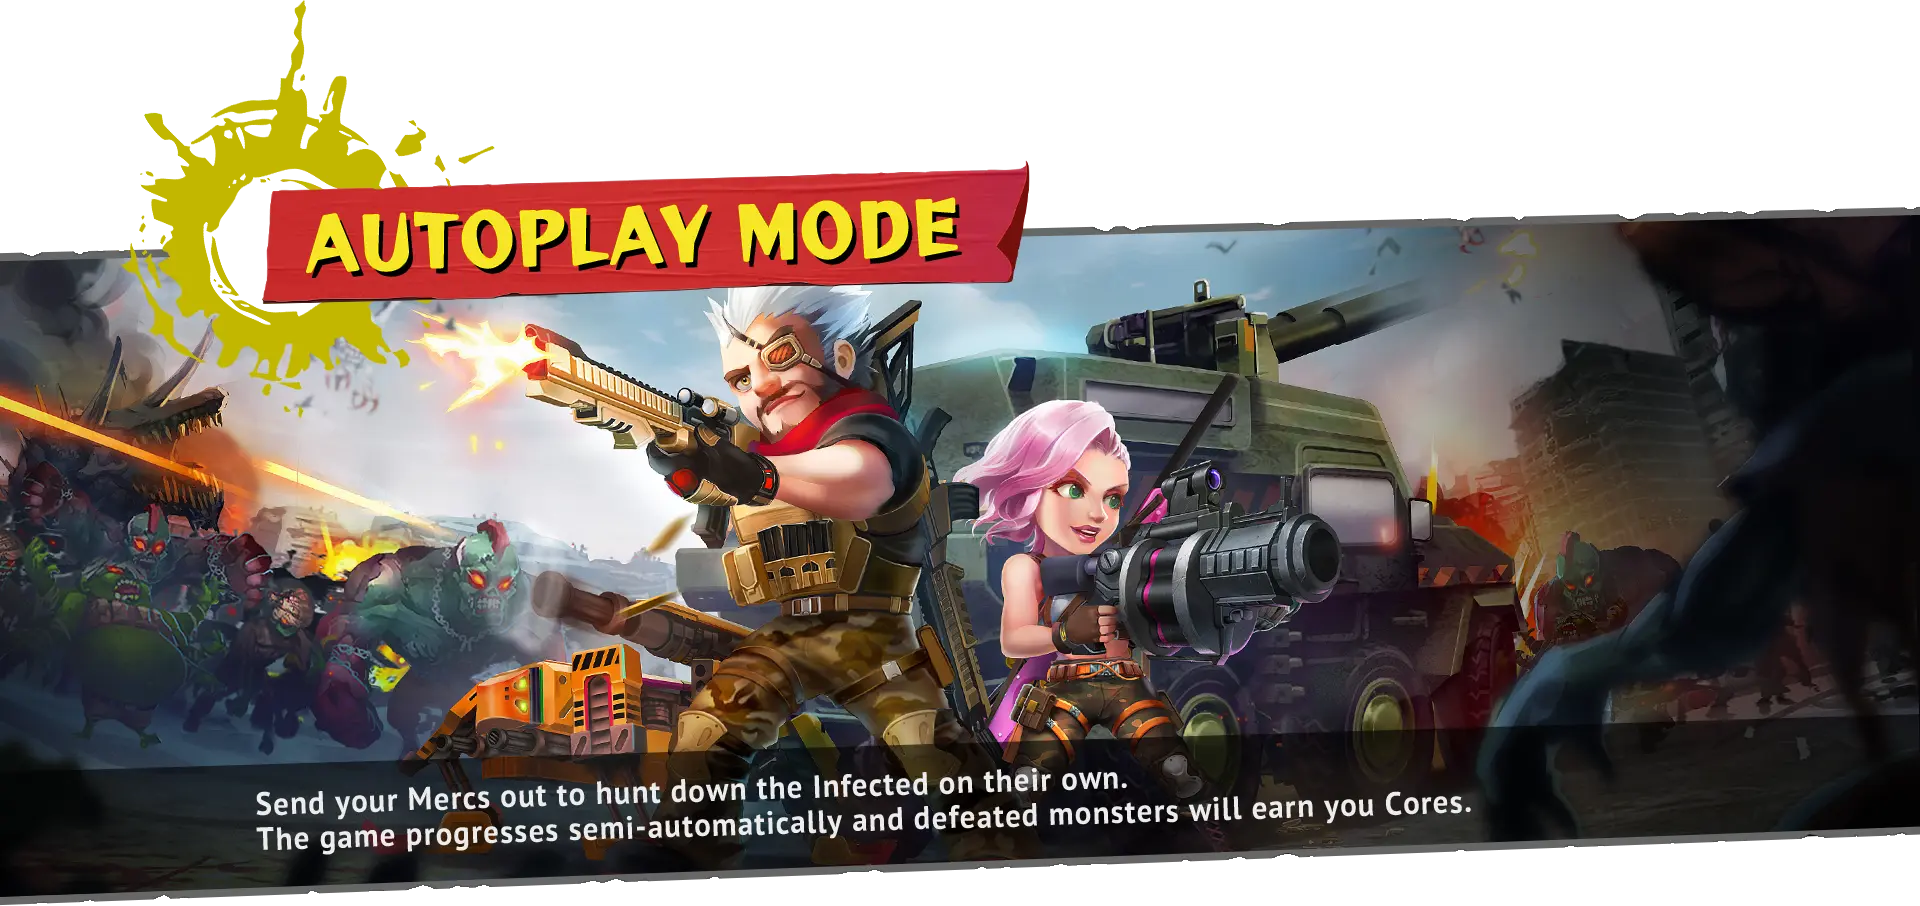 Crypt Busters Auto play mode screen image